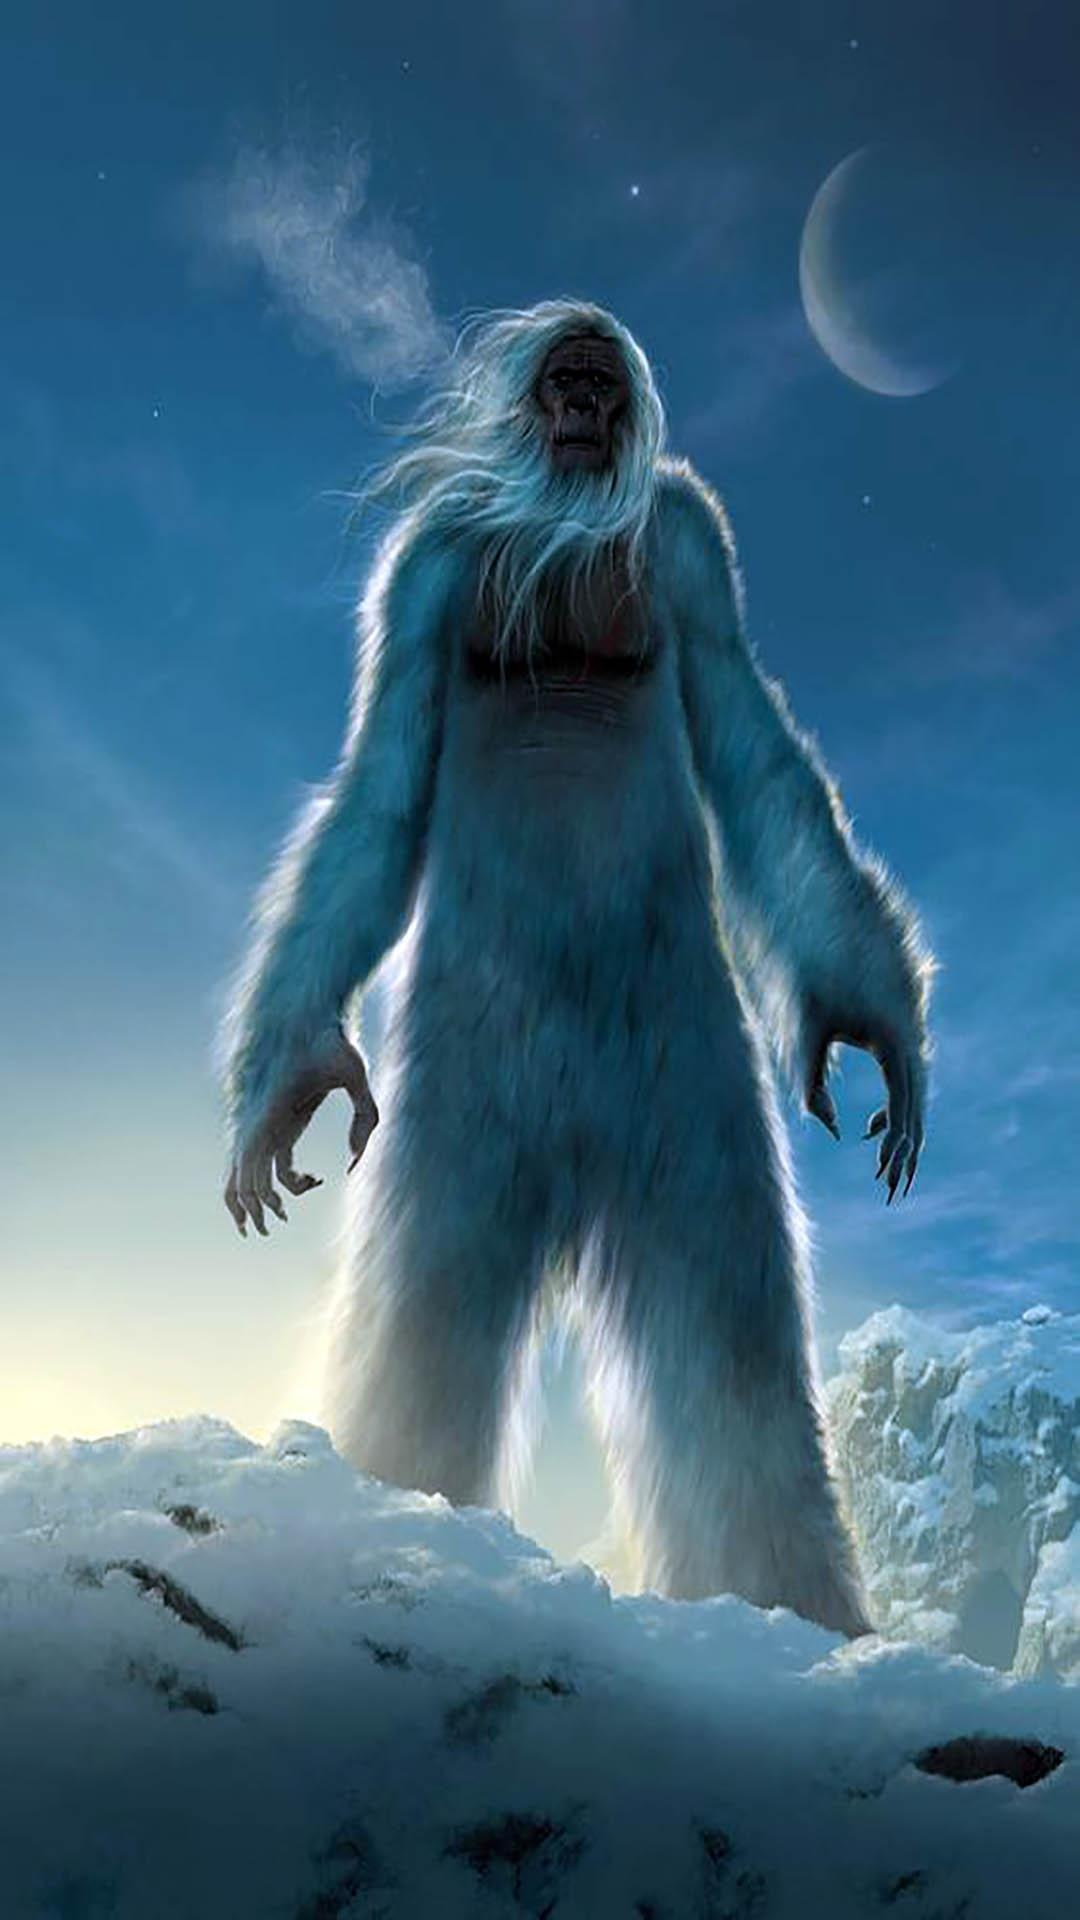 Abominable snowman, Yeti legend, Mythical creature, Mysterious sightings, 1080x1920 Full HD Handy